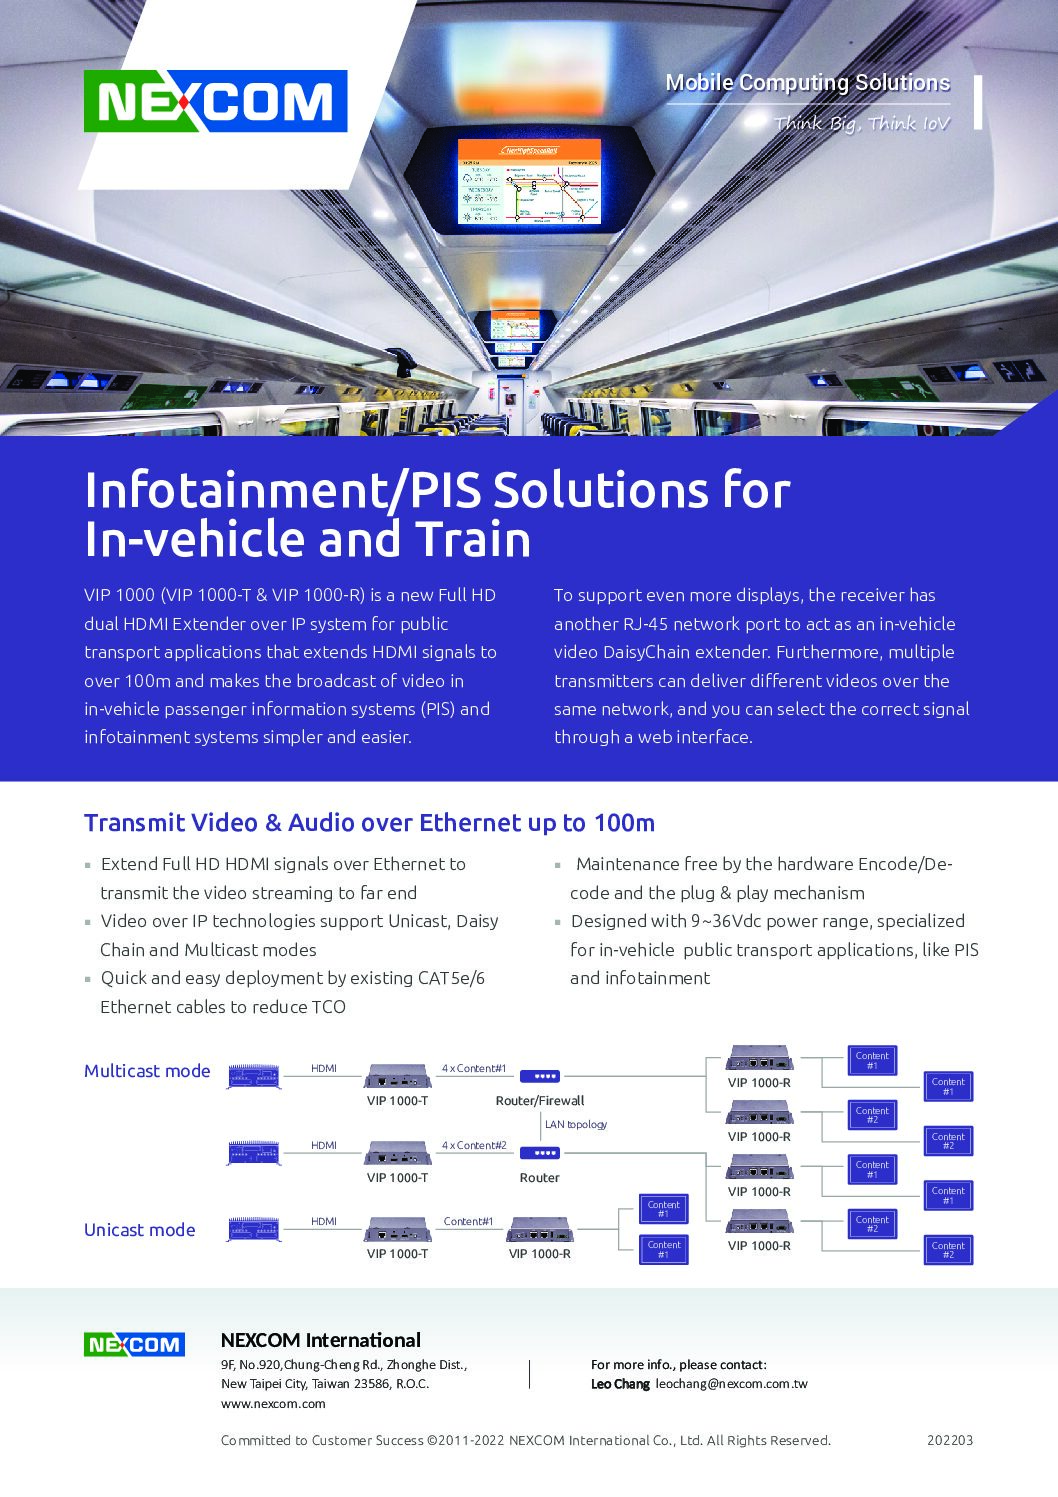 Infotainment/PIS Solutions for In-vehicle and Train